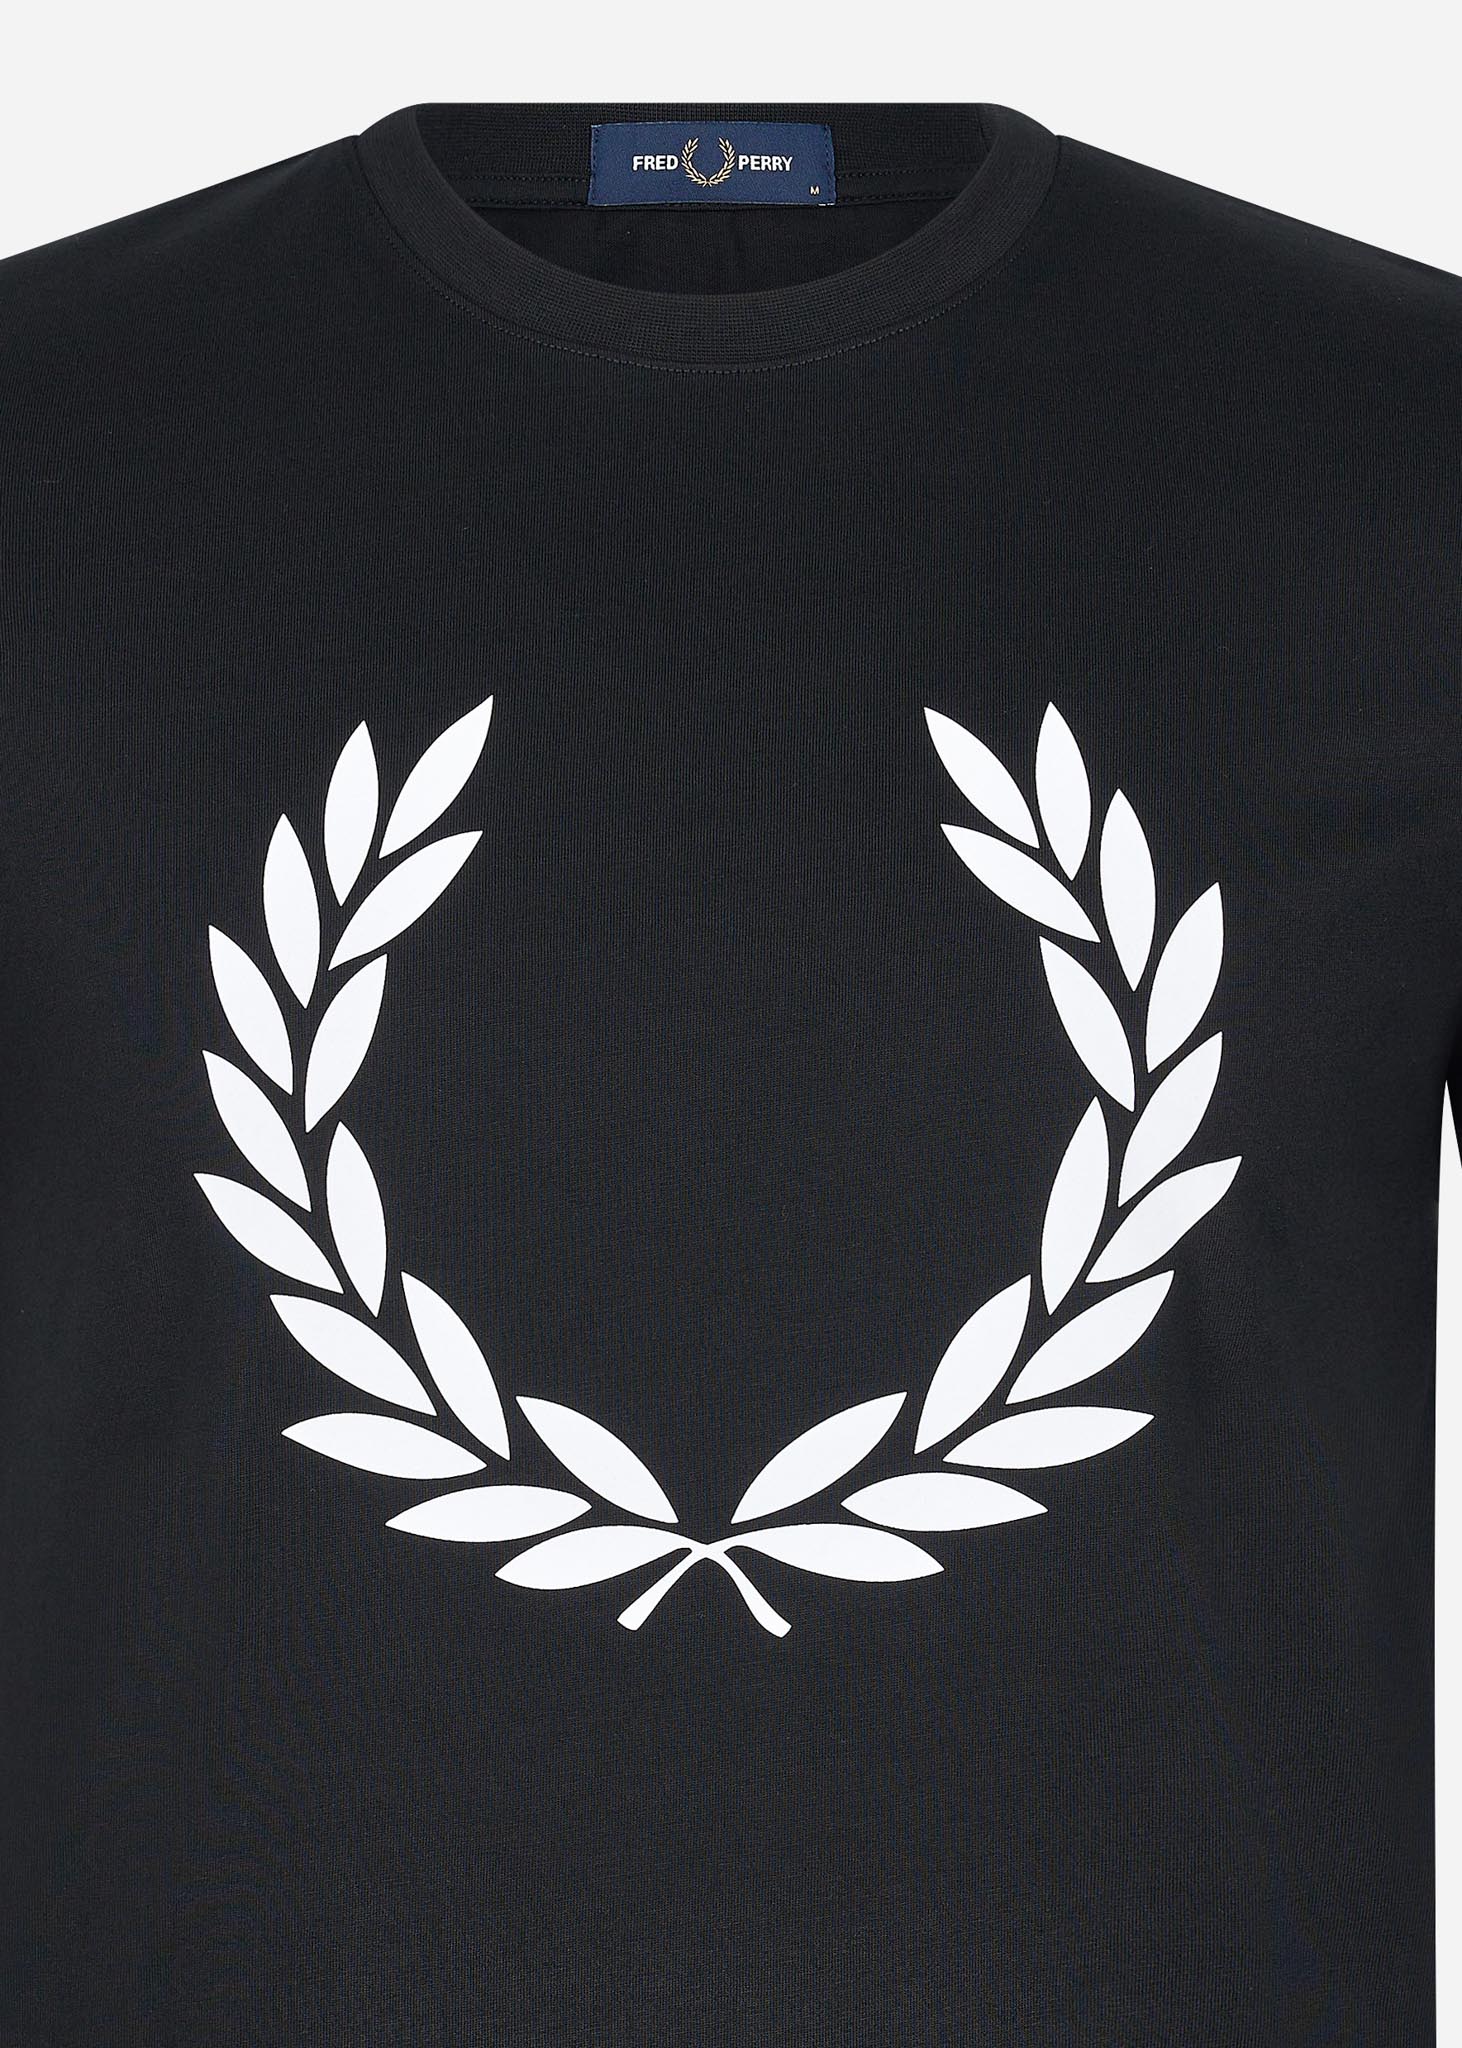 Fred Perry t-shirt with print black zwart